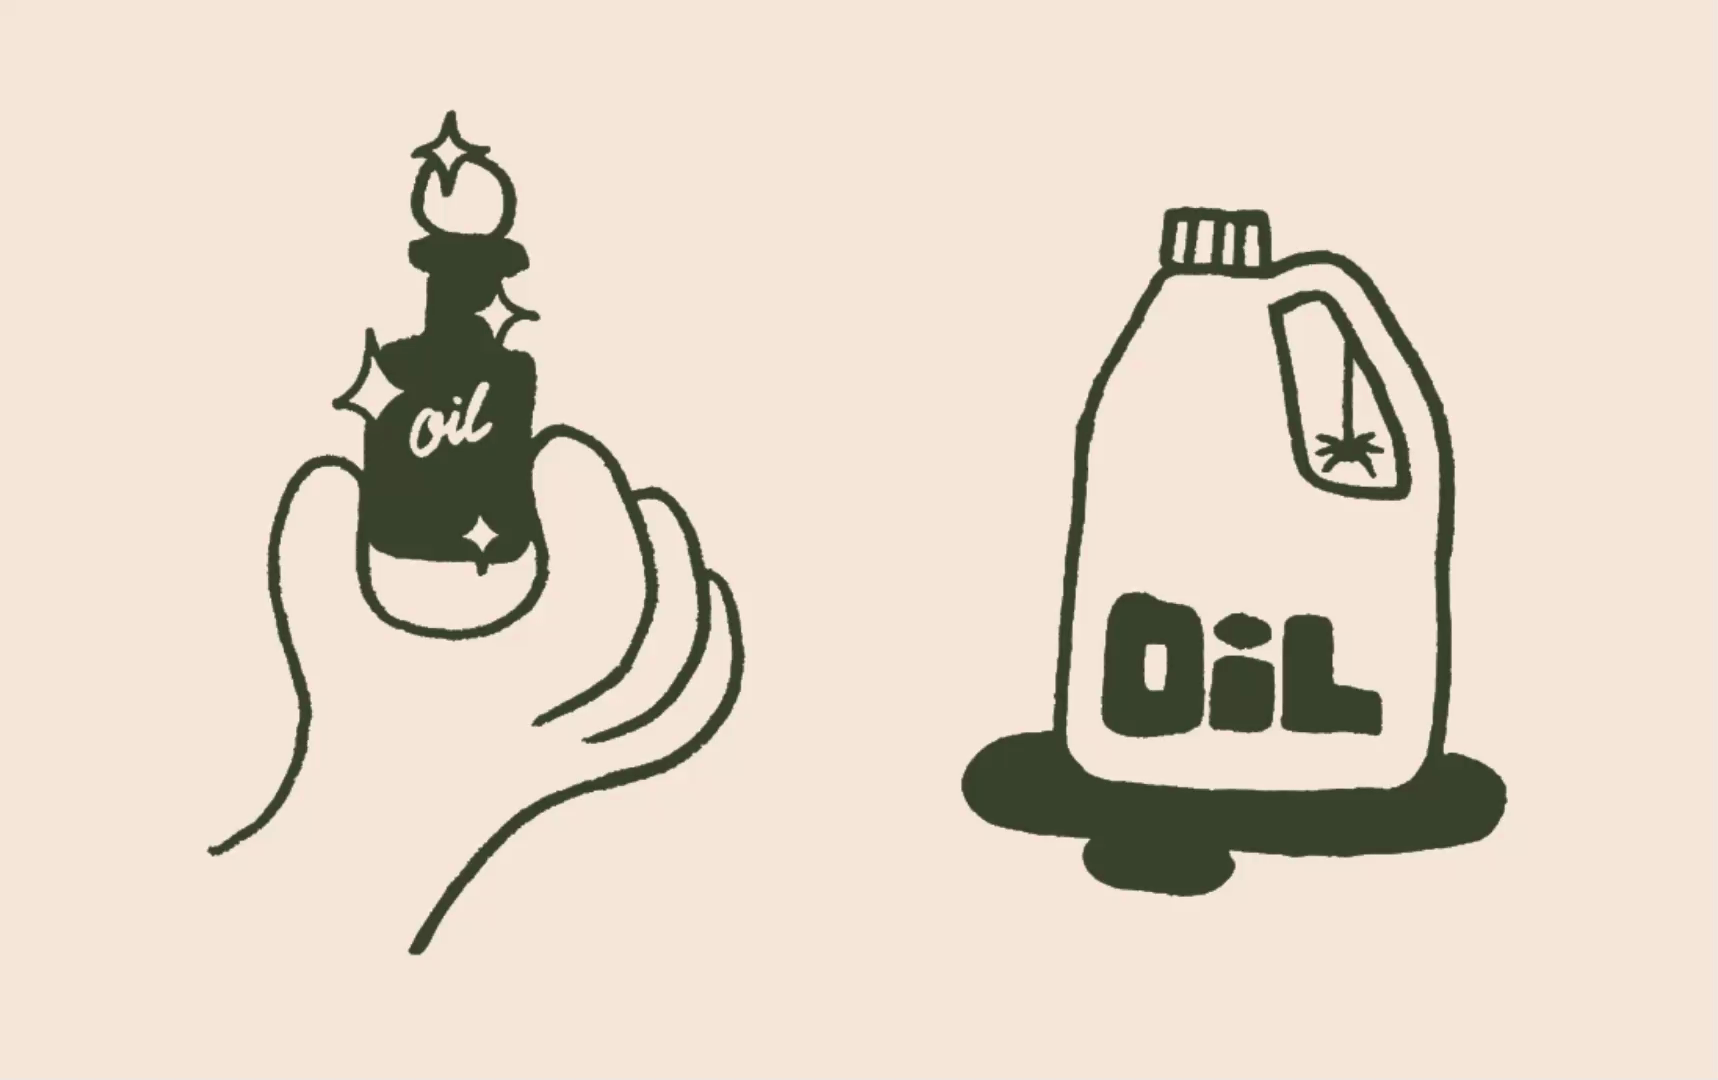 Animated pictograms by Gander for squeezable single origin olive oil Graza